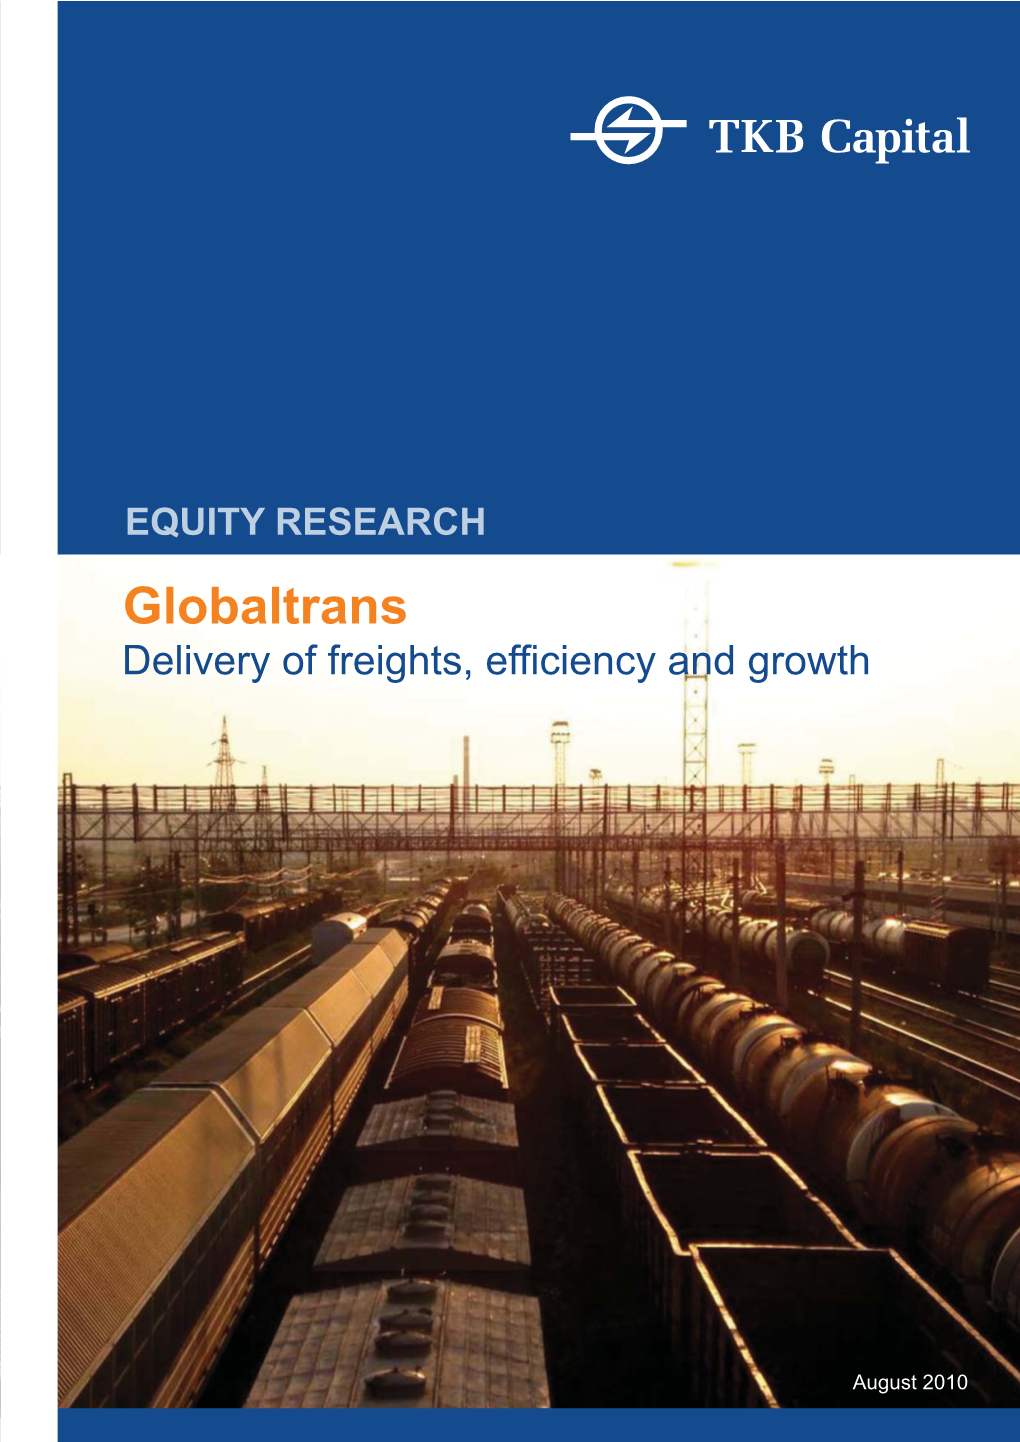 Globaltrans (GLTR) Delivery of Freights, Efficiency and Growth